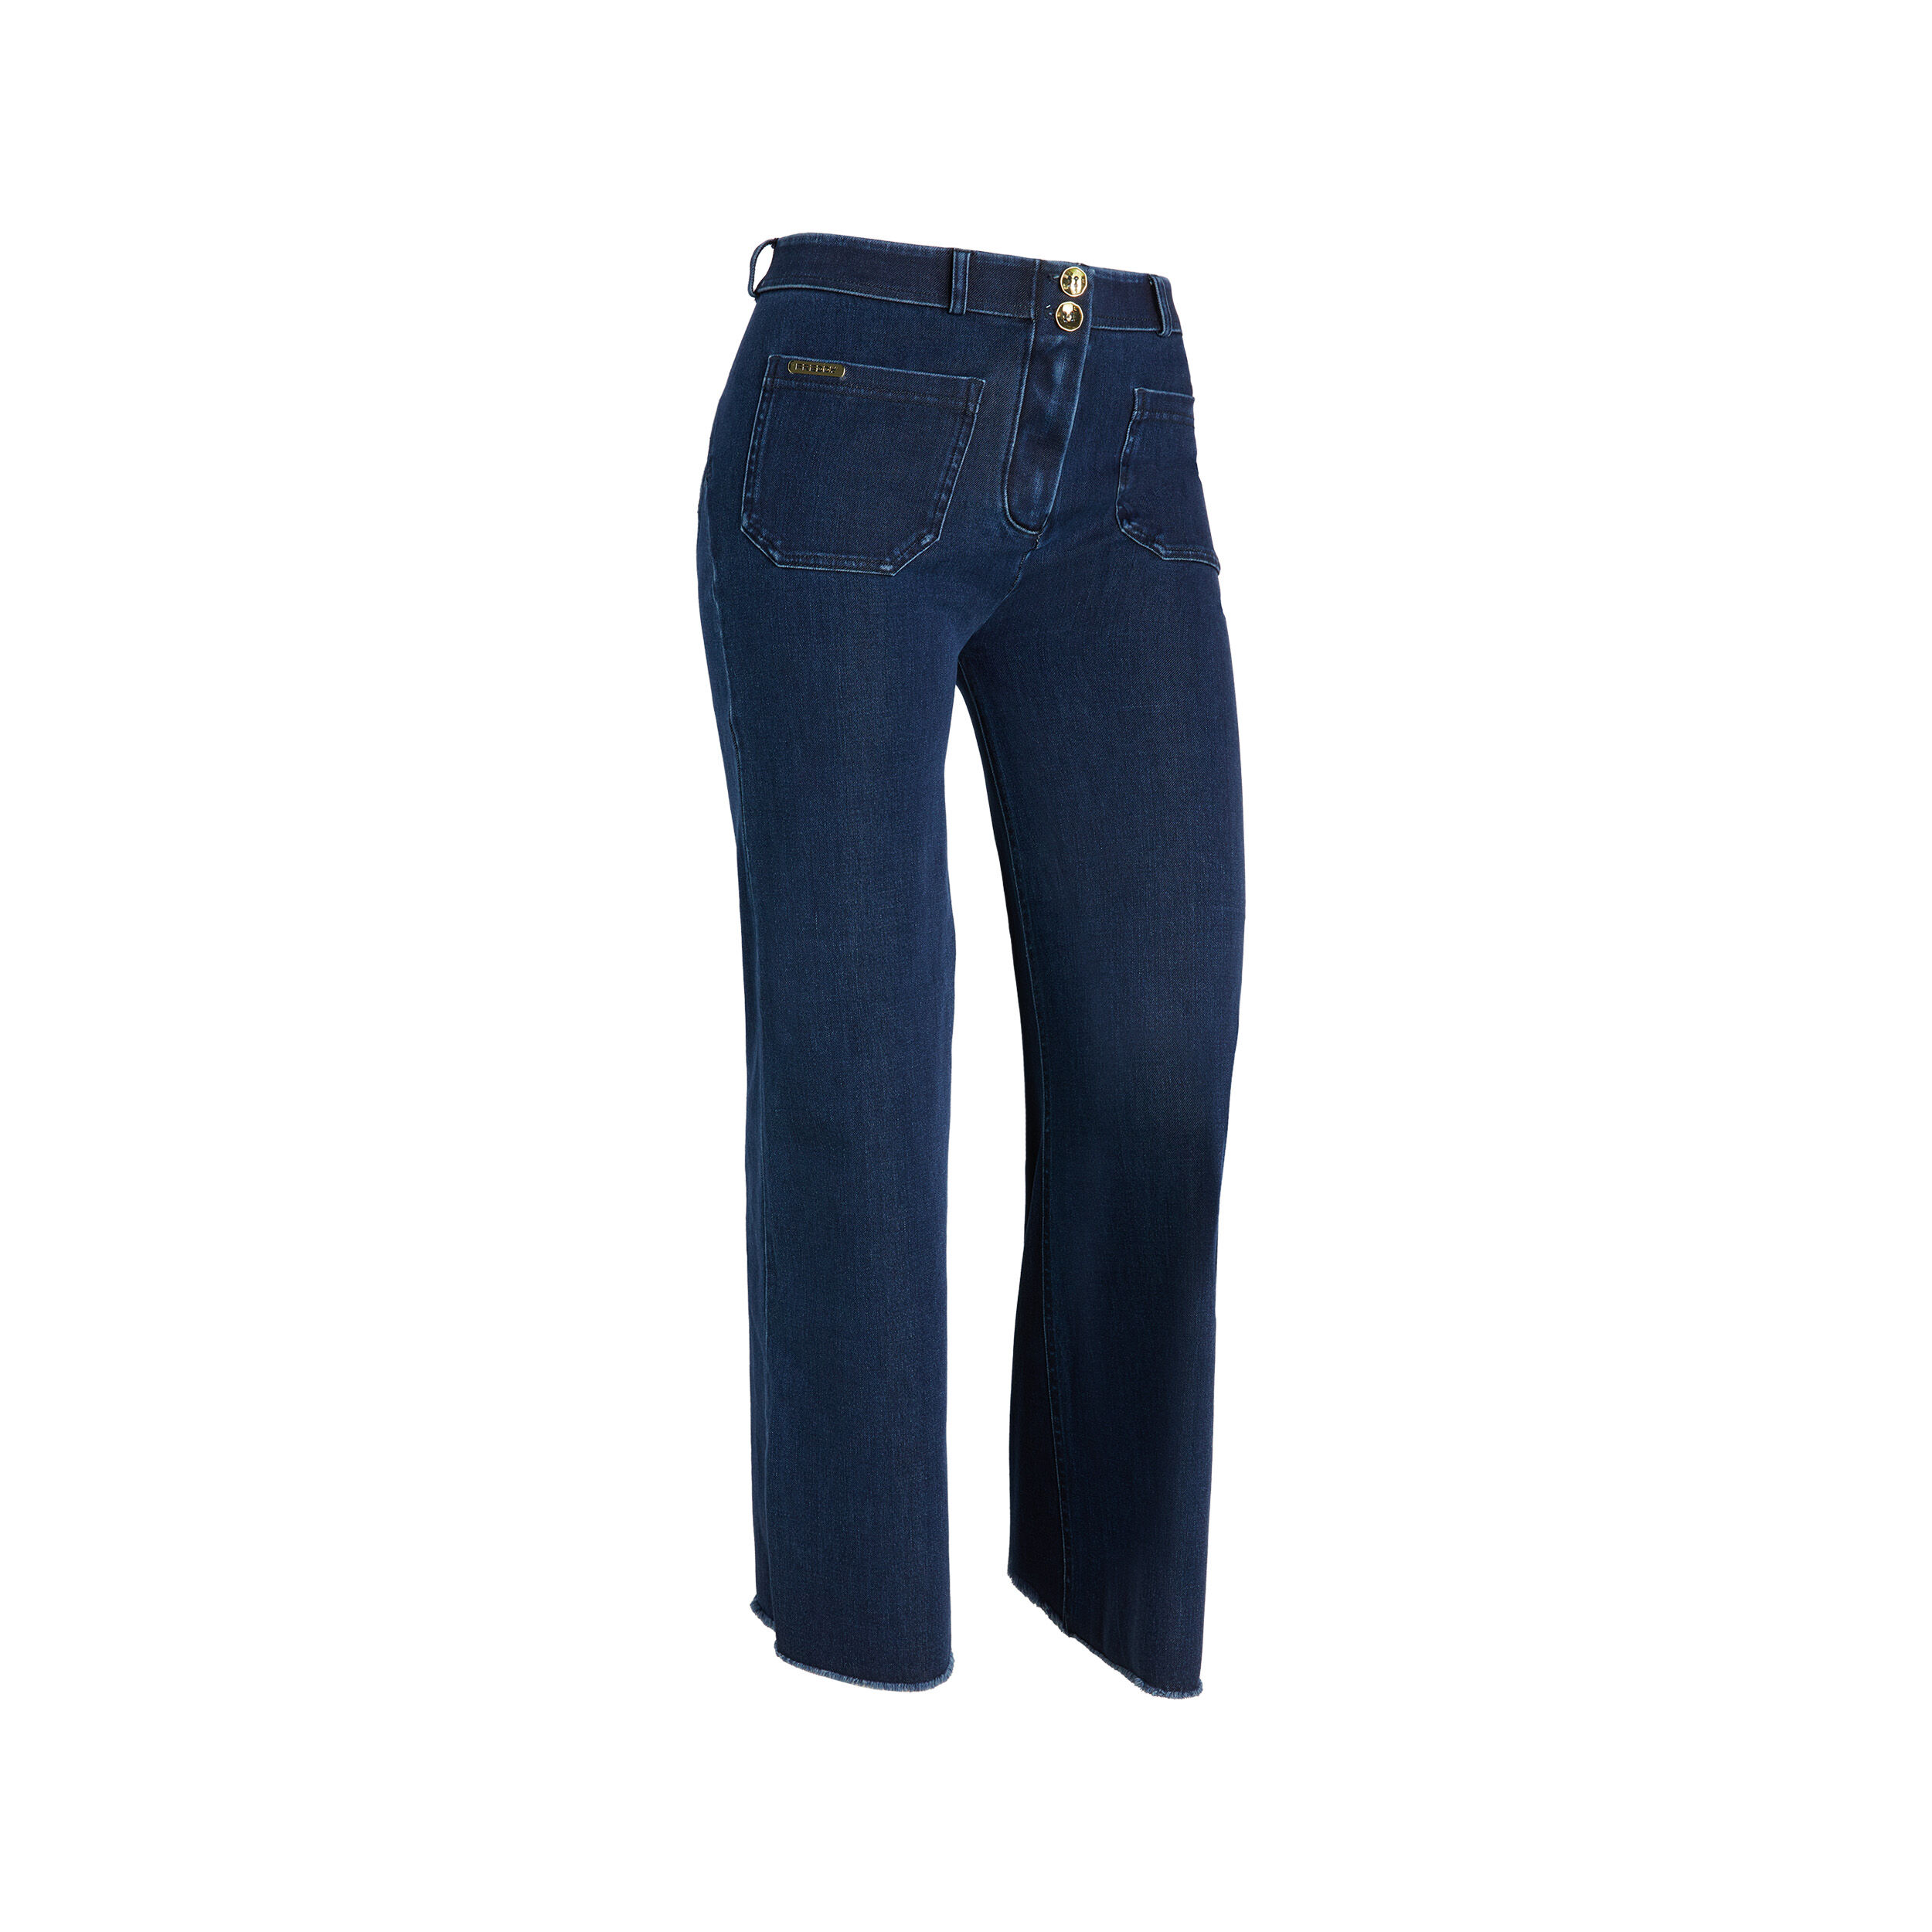 Freddy Jeans push up WR.UP® wide leg fondo distressed Dark Jeans-Seams On Tone Donna Small